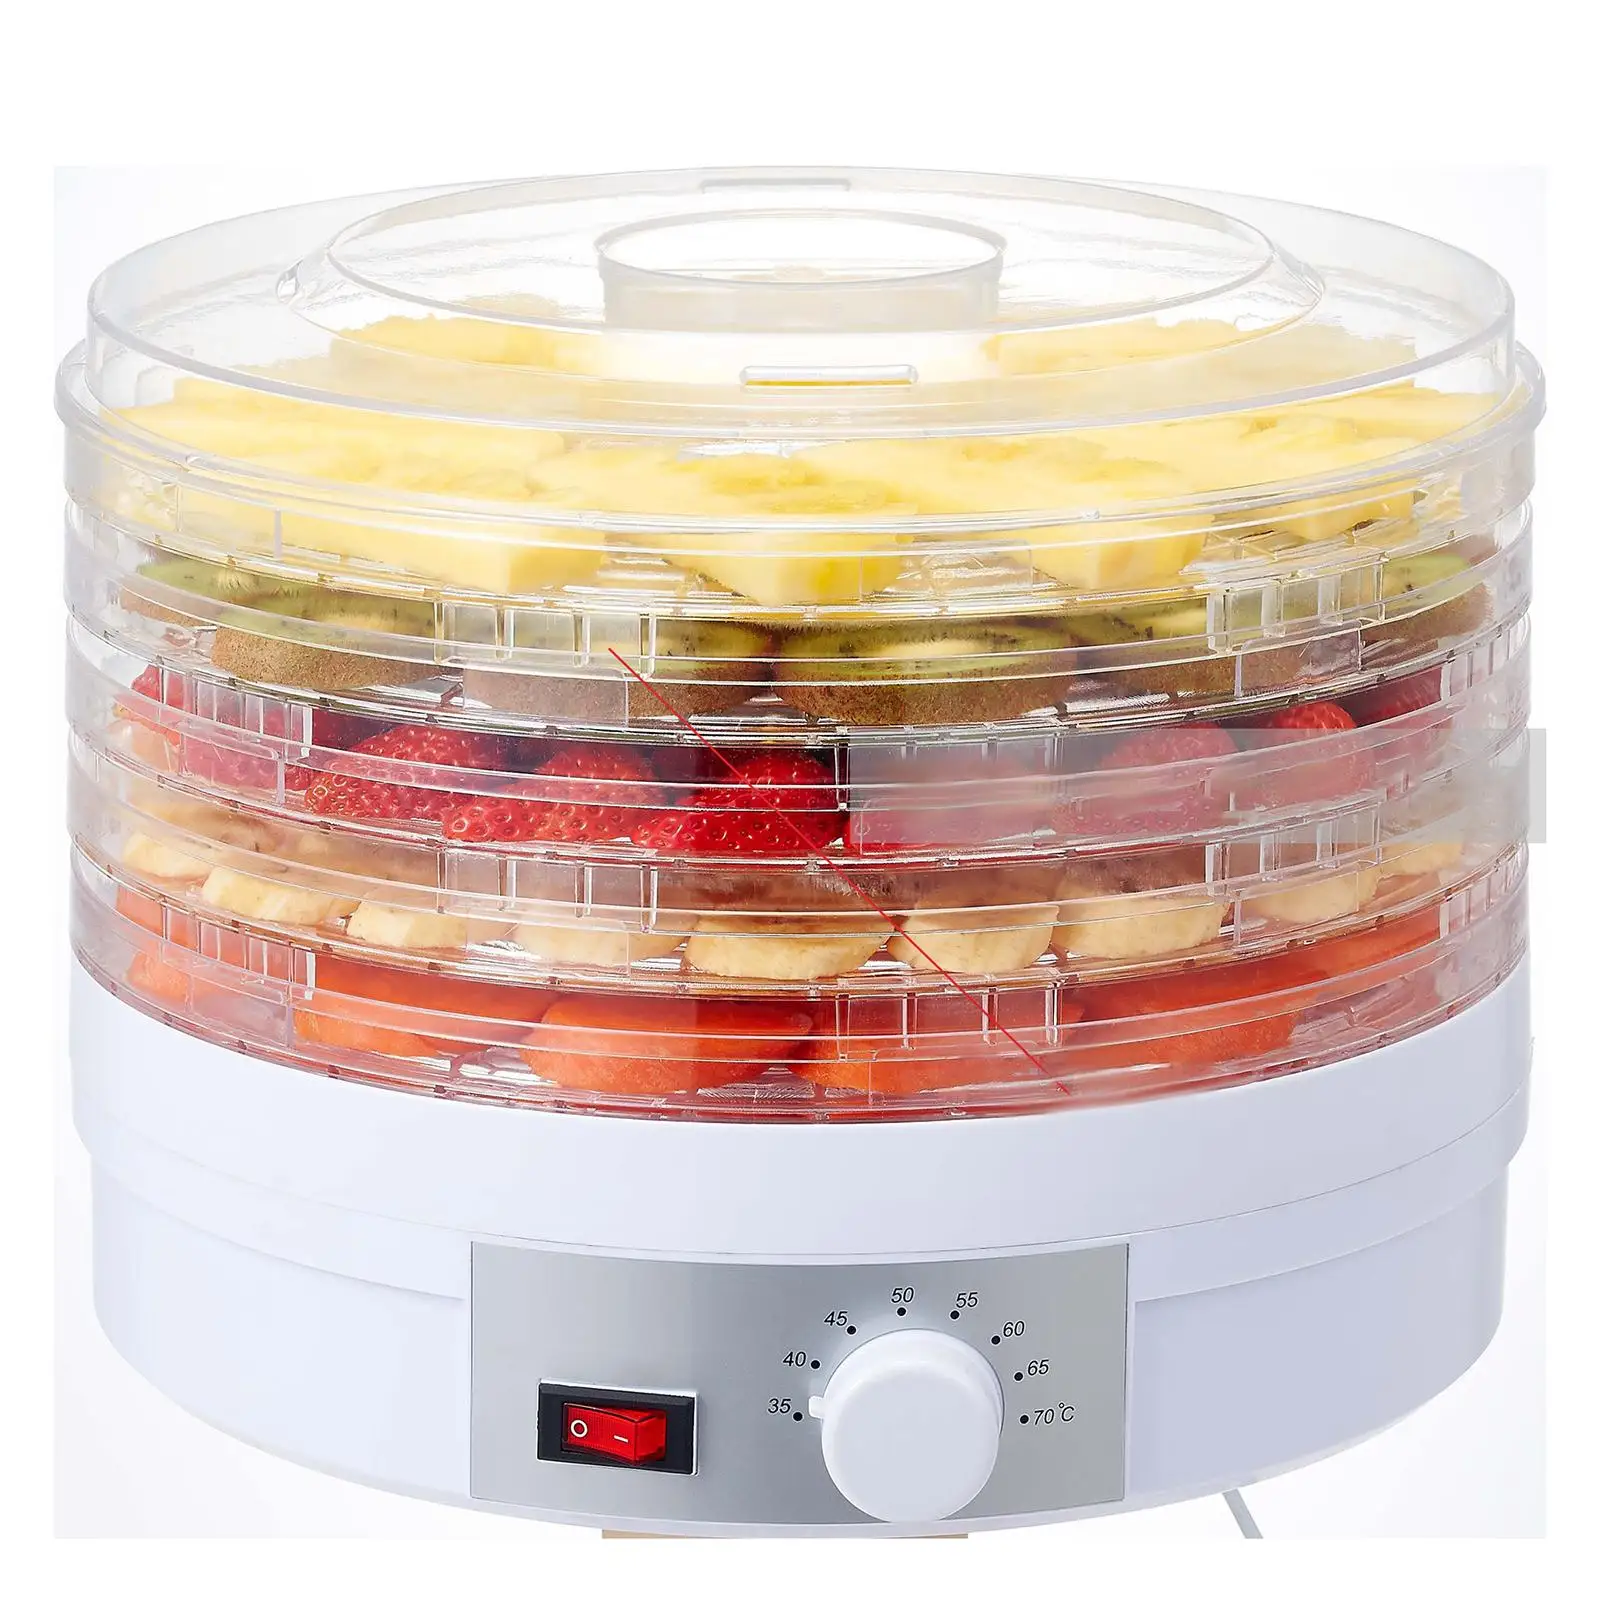 Fruit Dryer Multipurpose Temperature Control Power Saving Portable Food Dry Machine 5 Layers for Kitchens Pet Food Vegetable